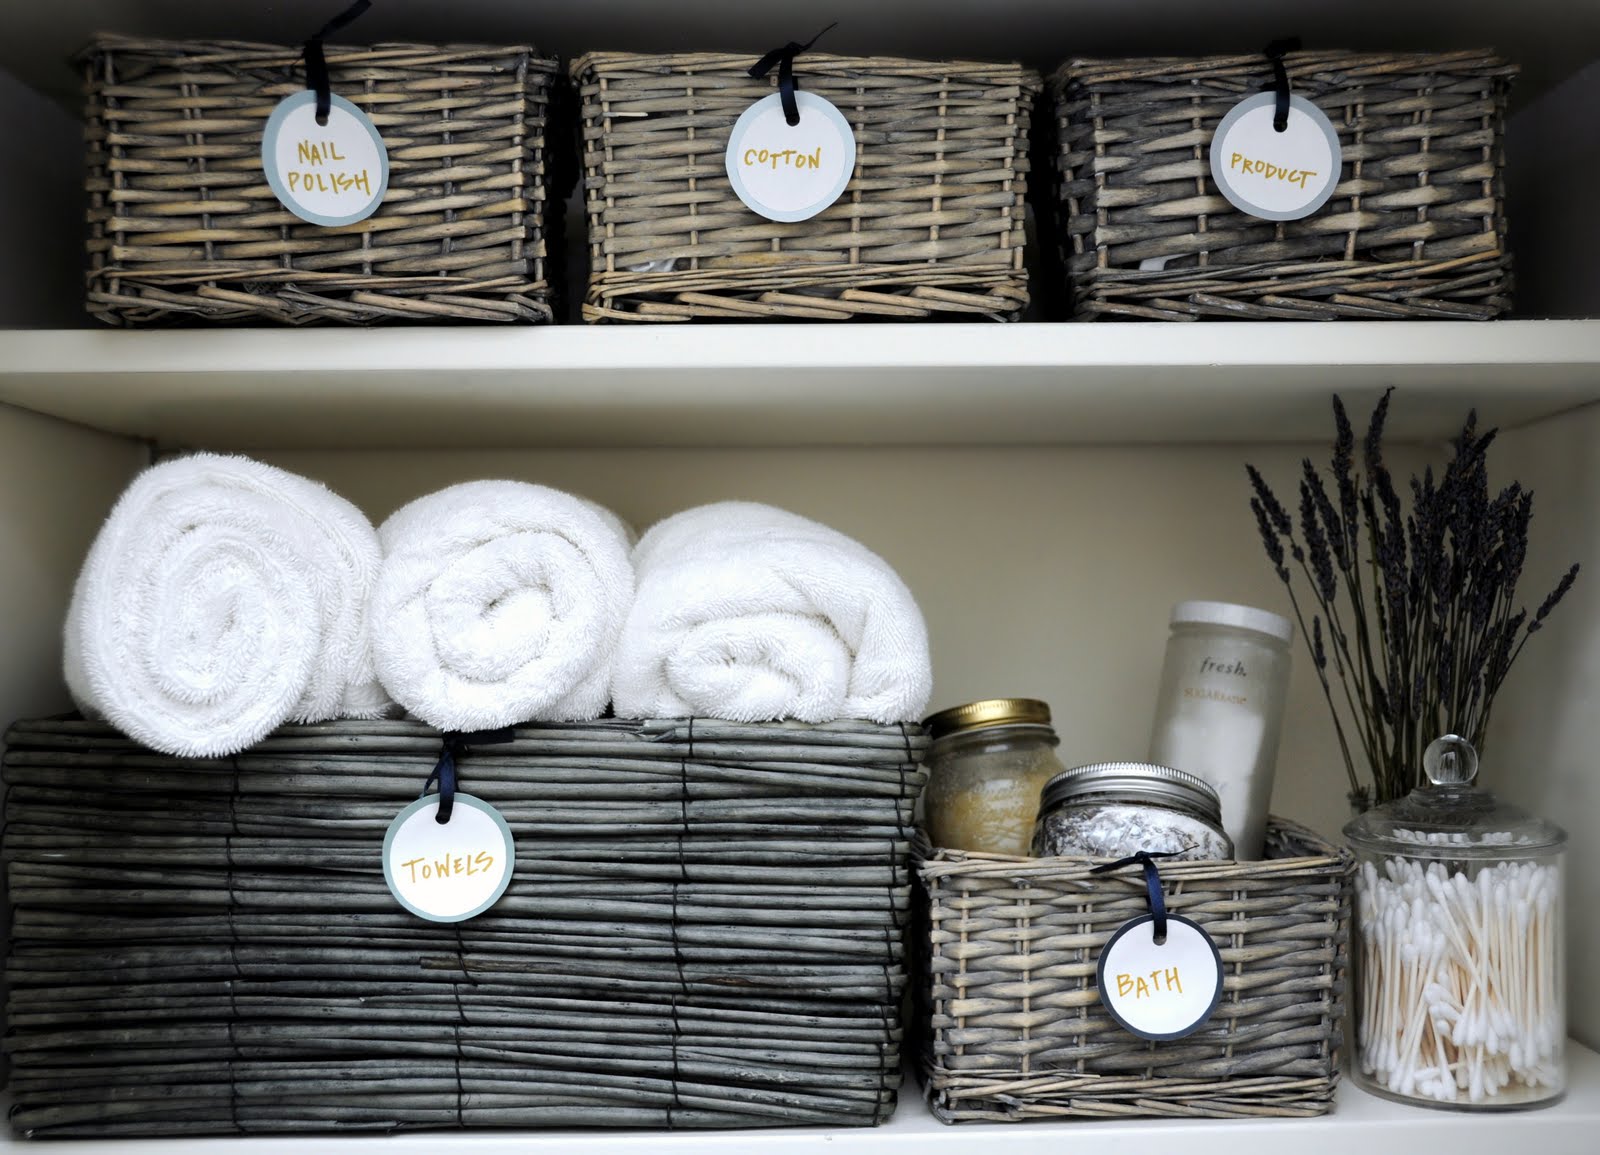 how to organize linen closet: declutter, sort by category, and store things in storage baskets with labels